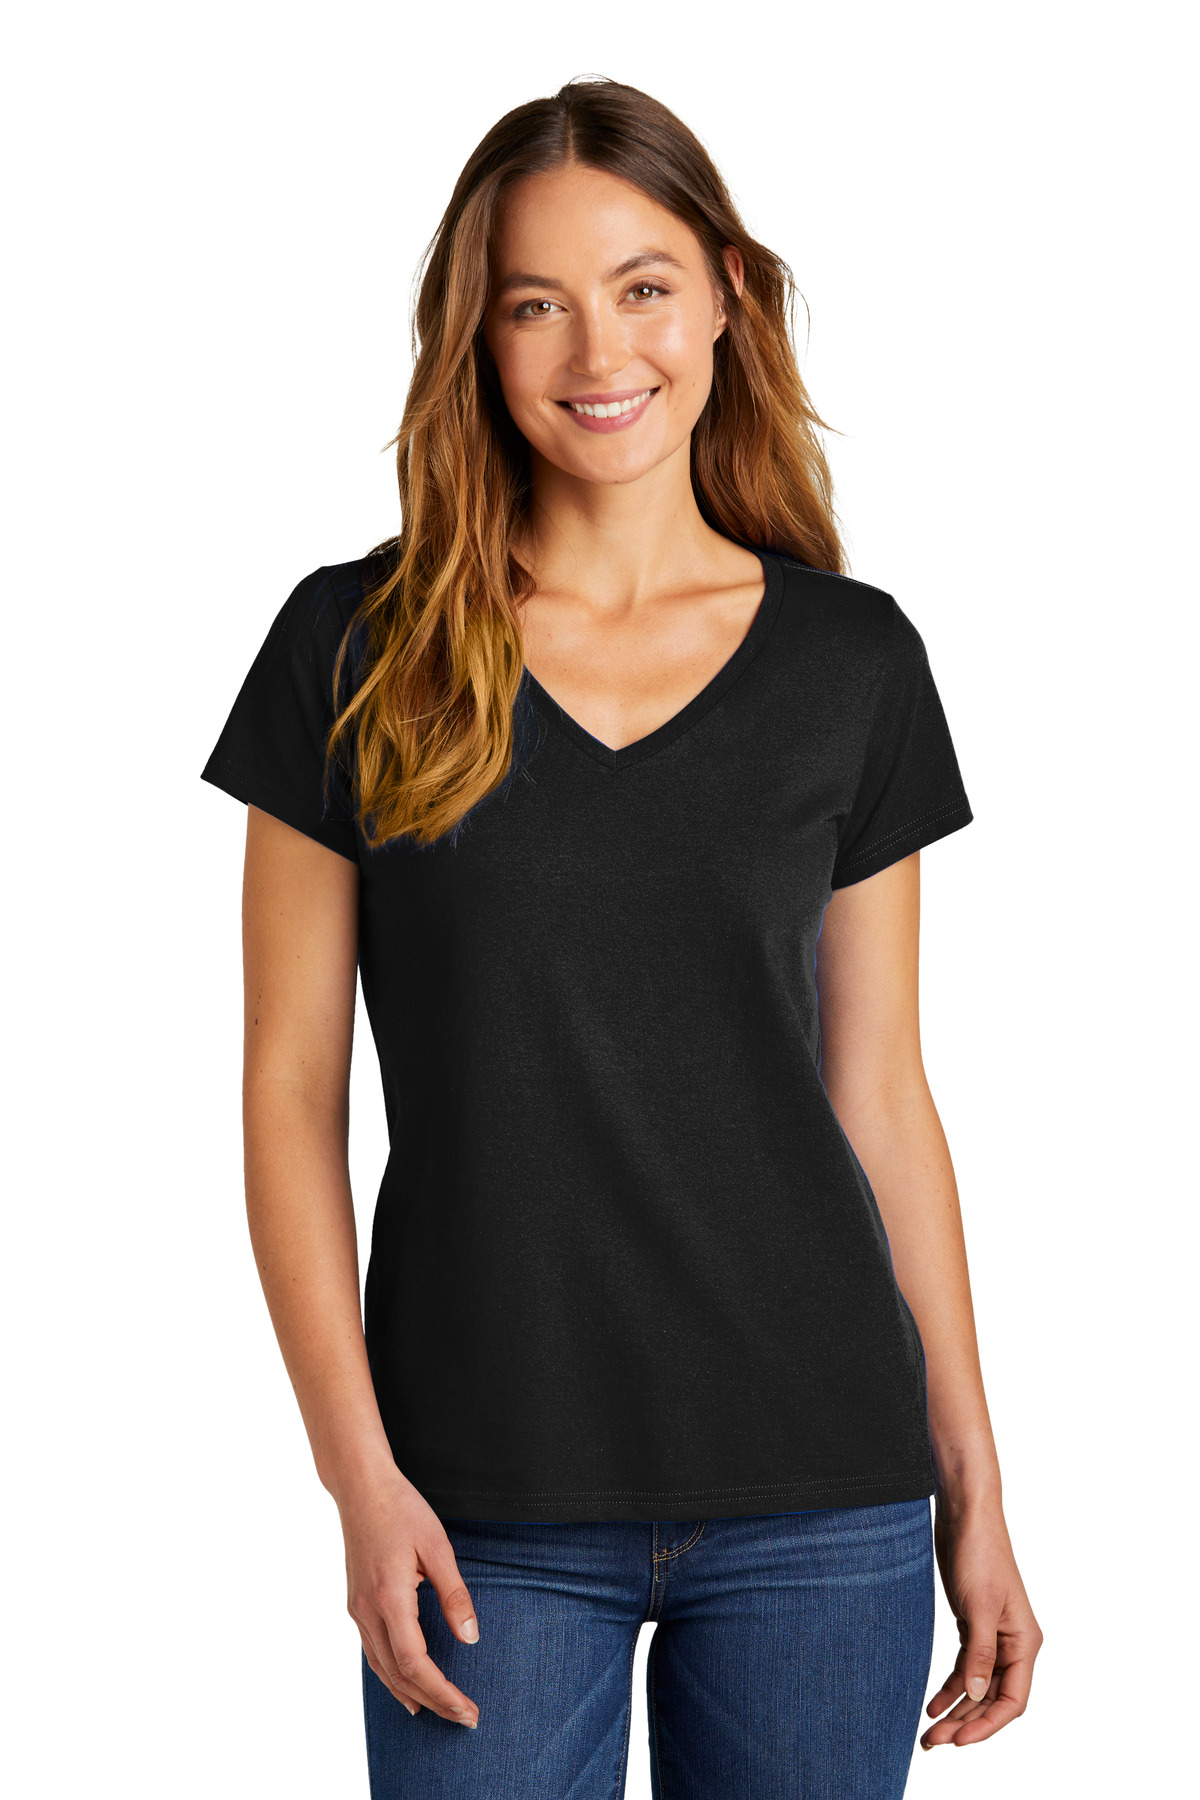 District DT5002 | Women's The Concert Tee ® V-Neck | ShirtSpace